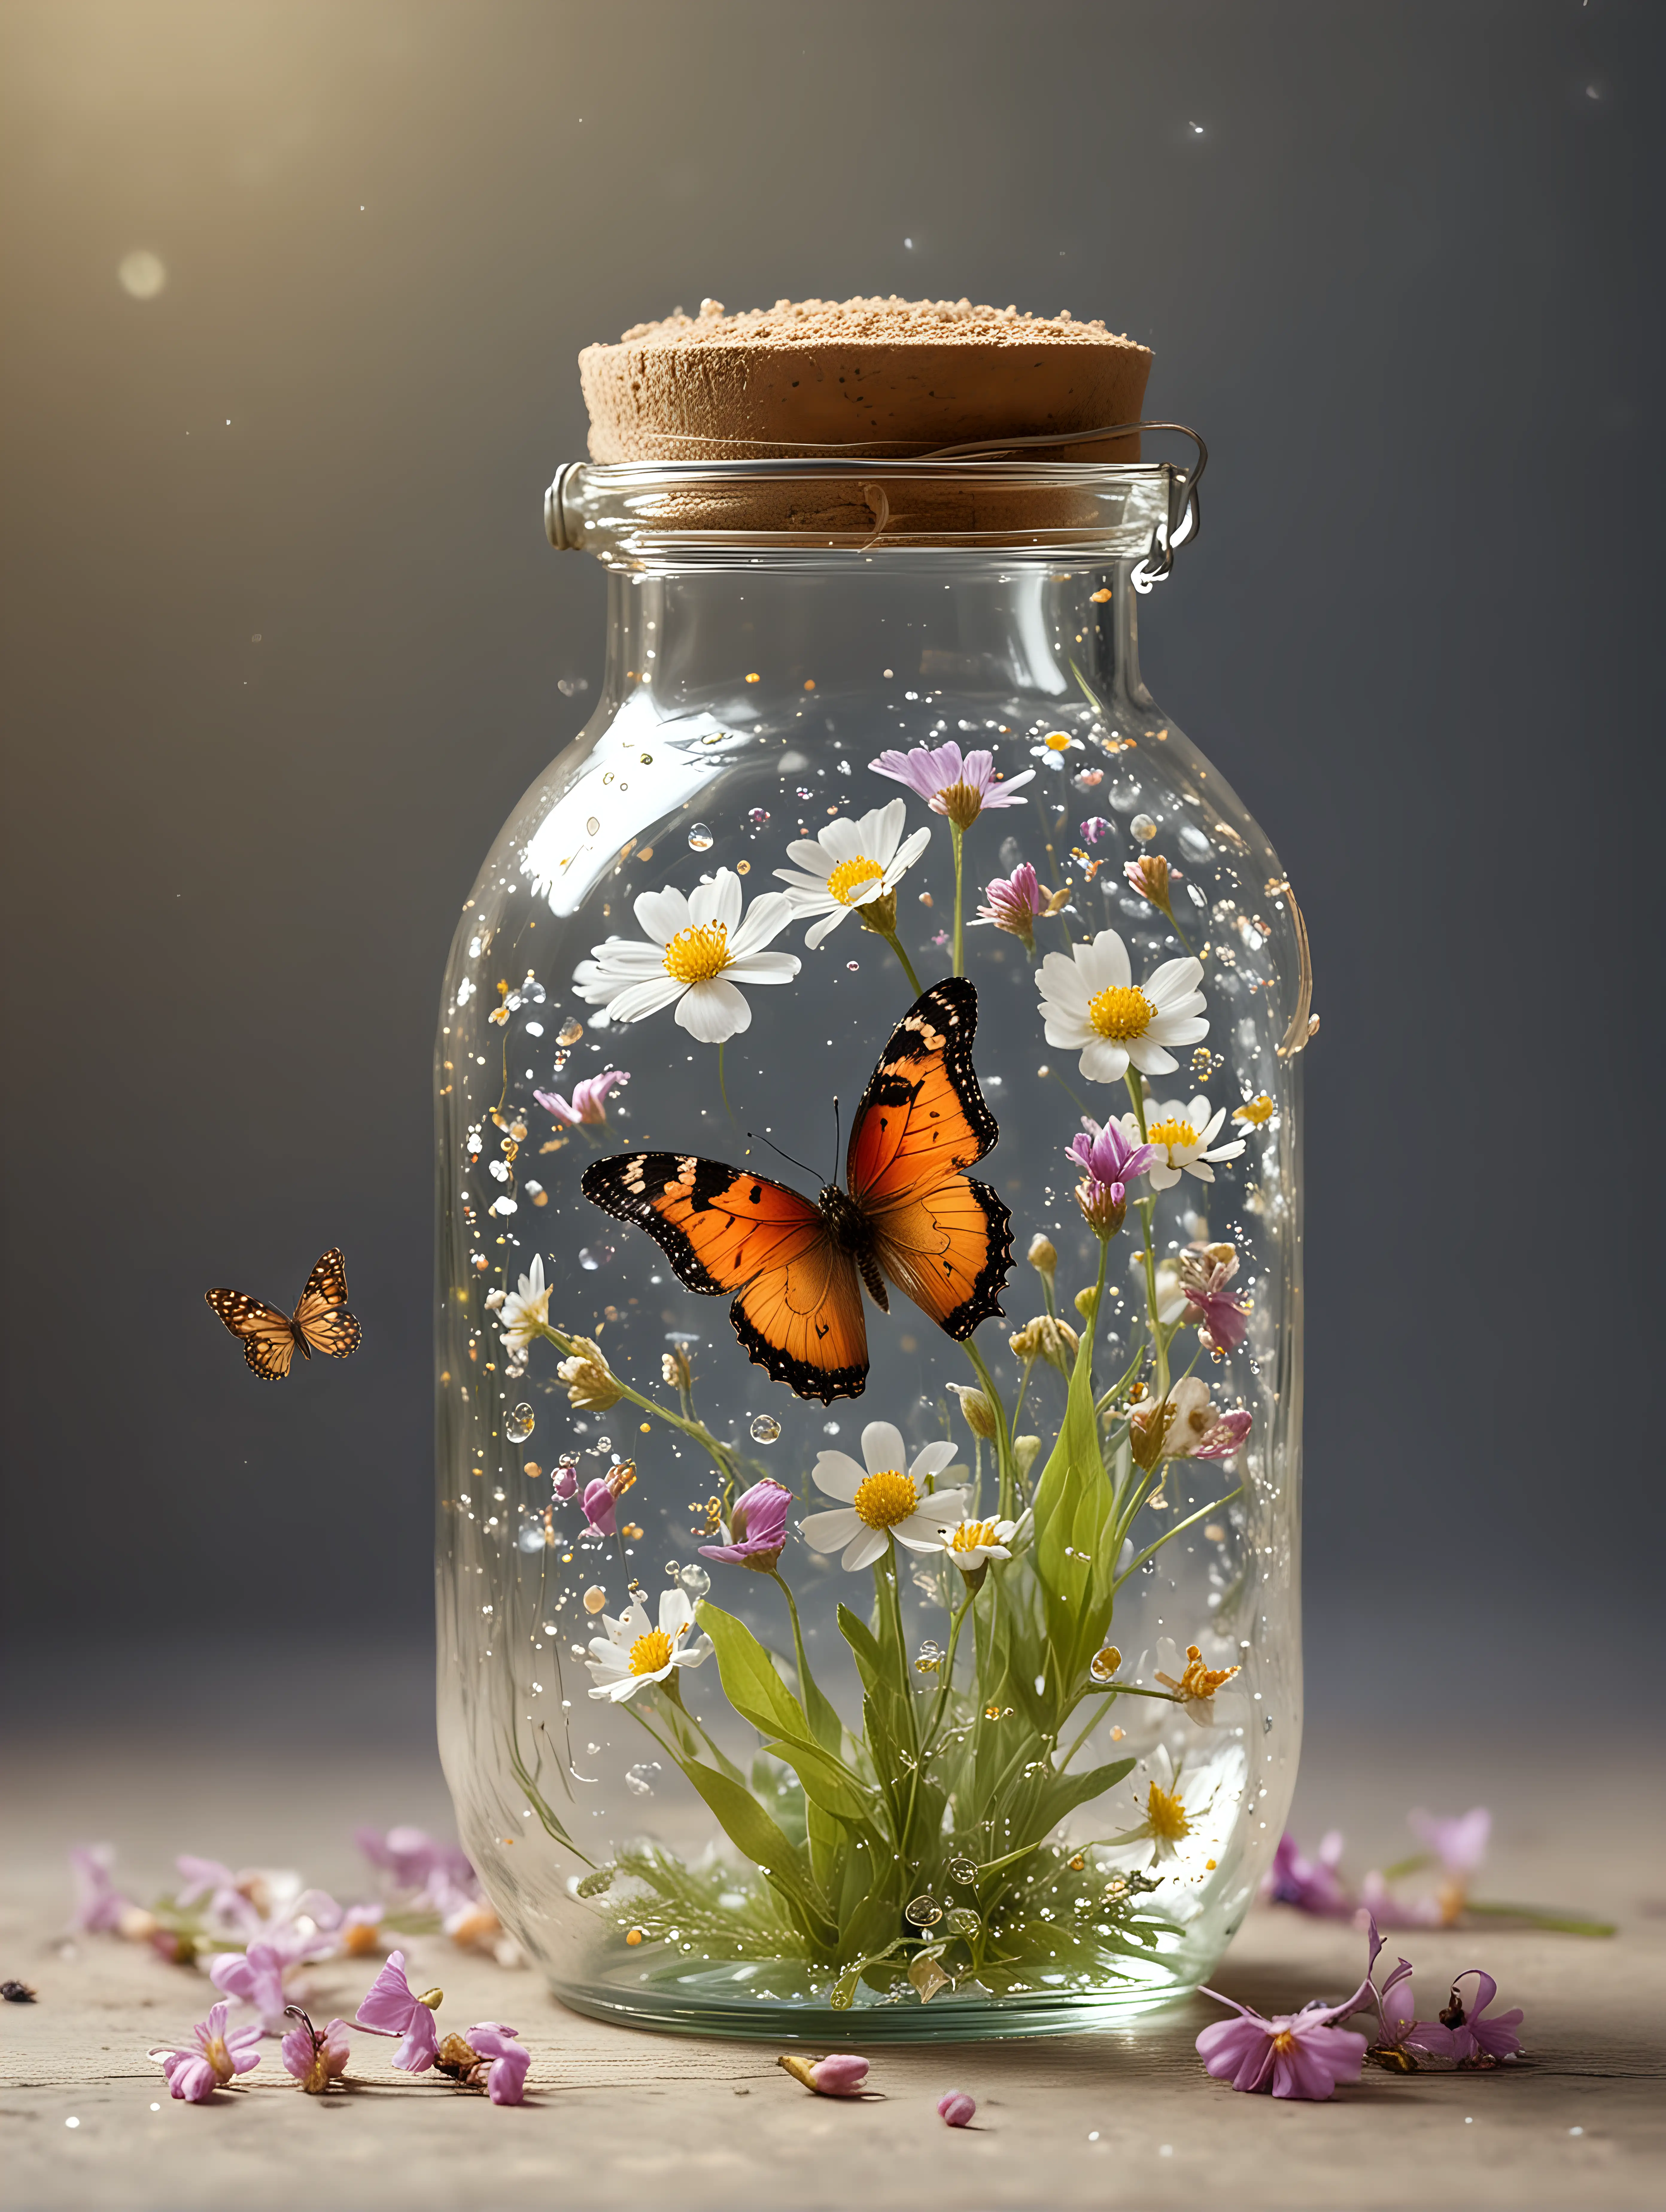 Enchanting Alchemical Glass Jar with Magical Butterflies and Sparkling Flowers